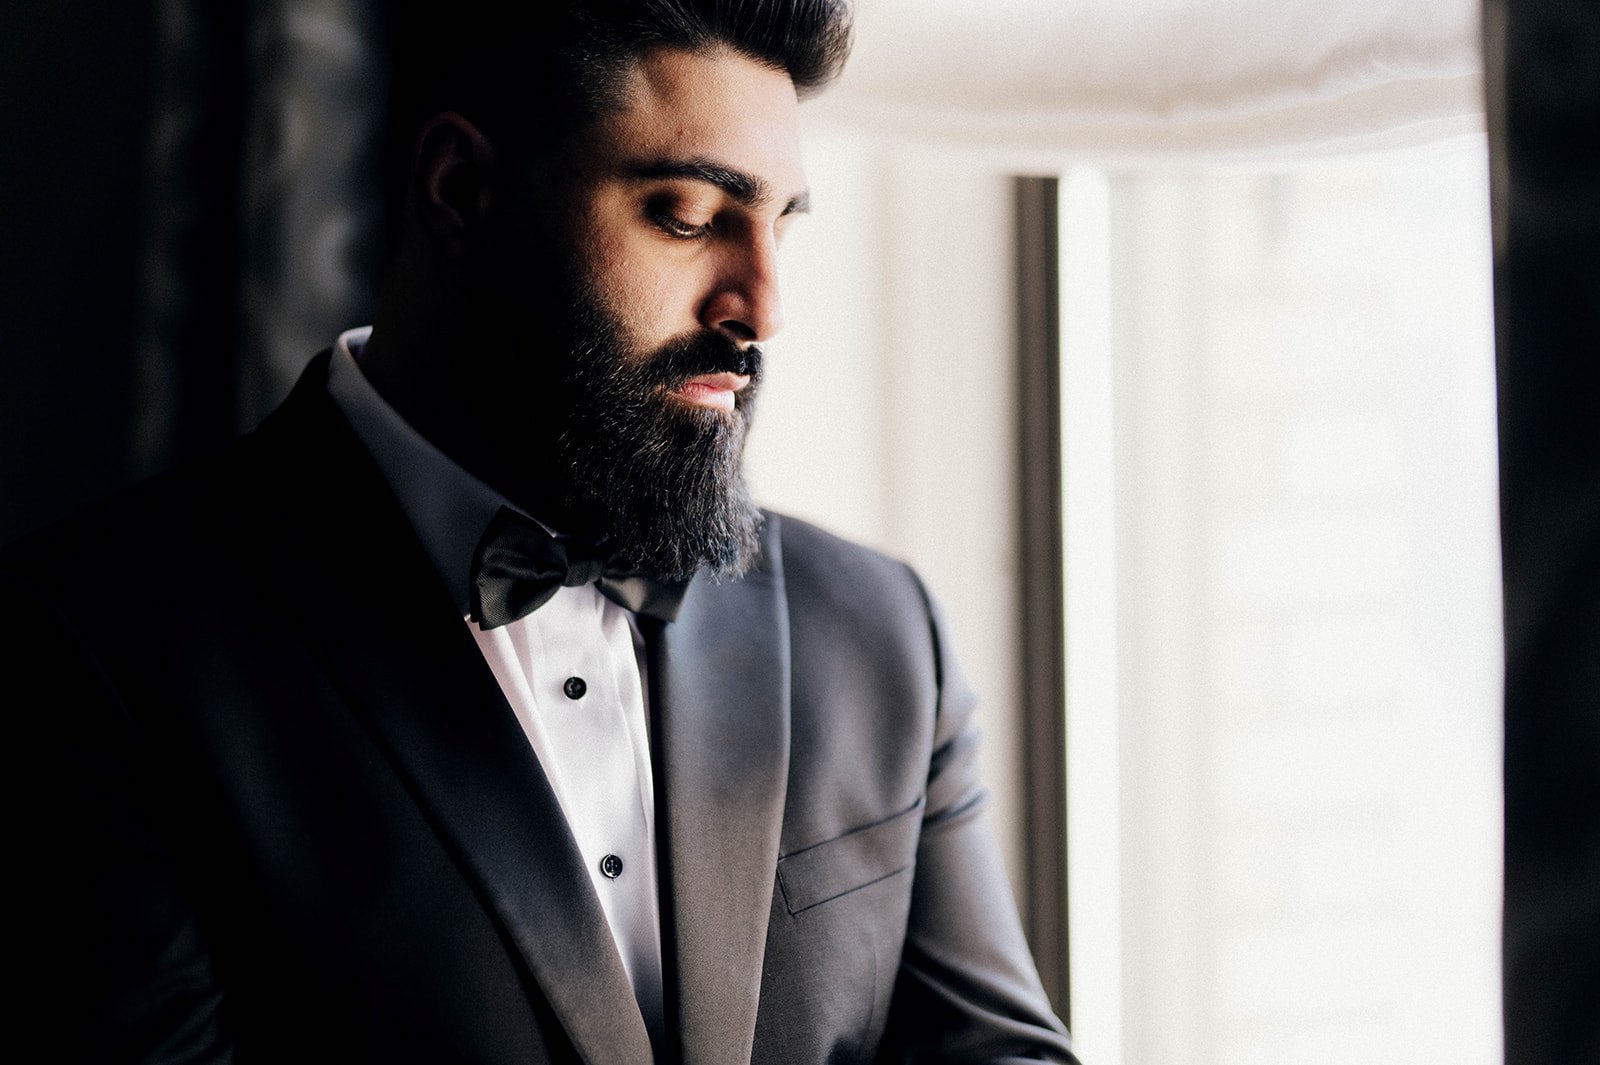 A groom looks out the window as he gets ready for his reception.